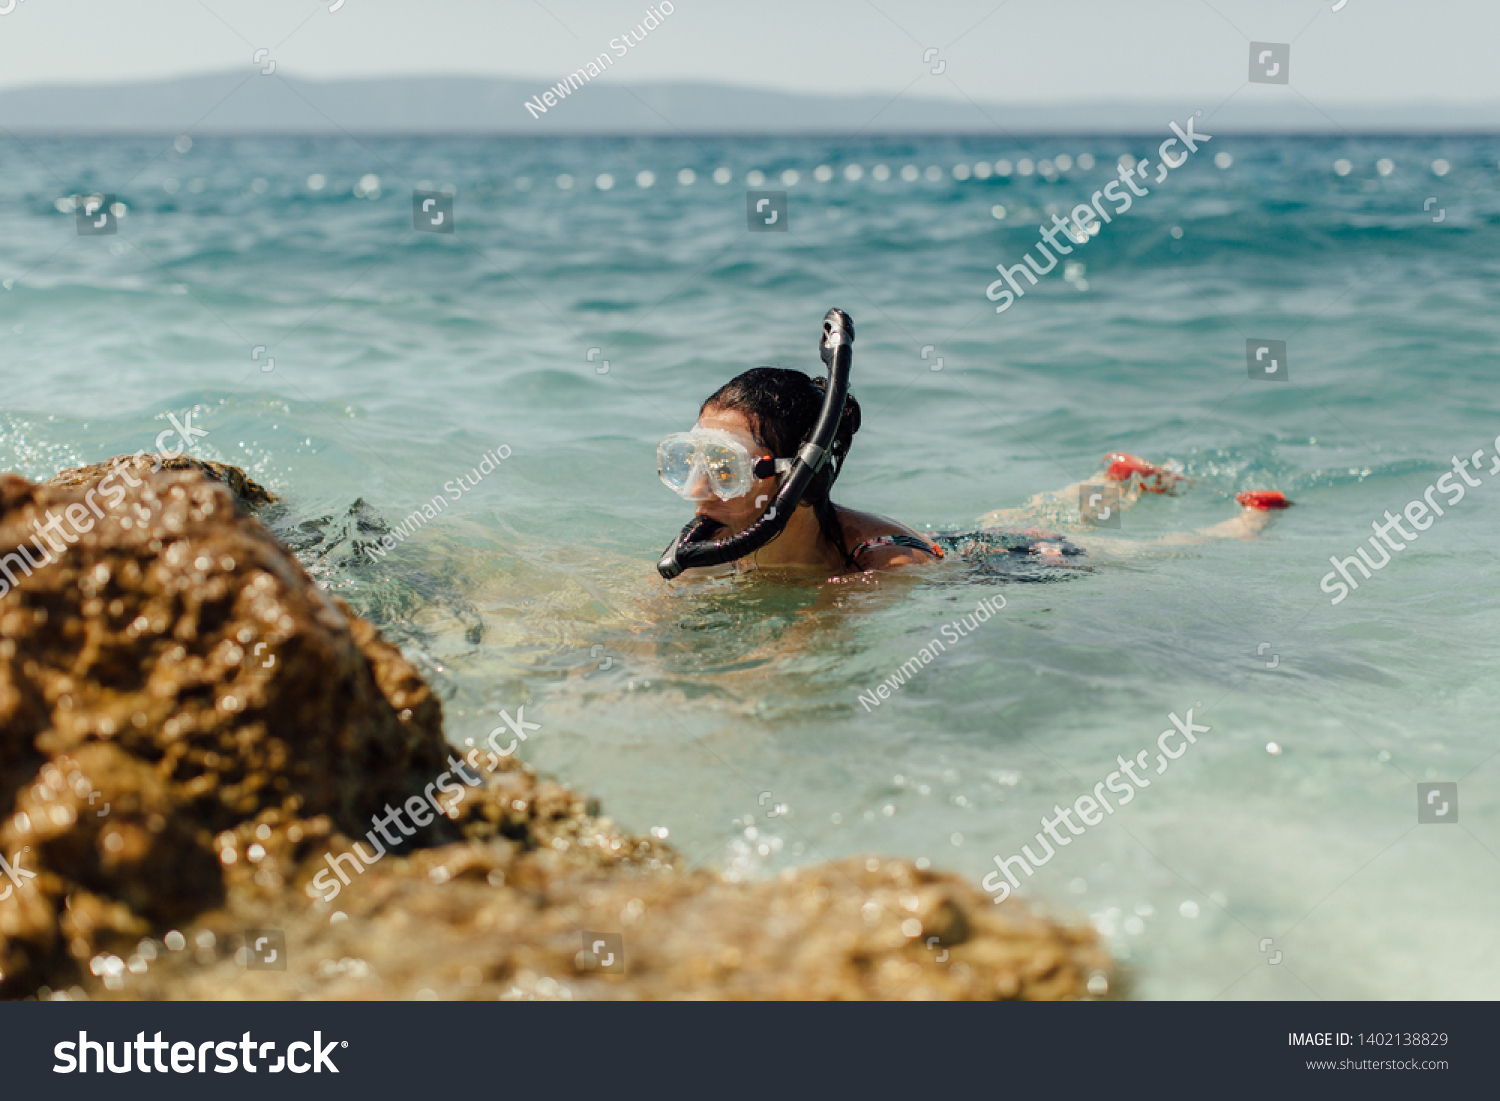 Female diver learning to dive at seashore. Woman wearing diving mask and snorkel snorkeling in sea on hot sunny day. #1402138829